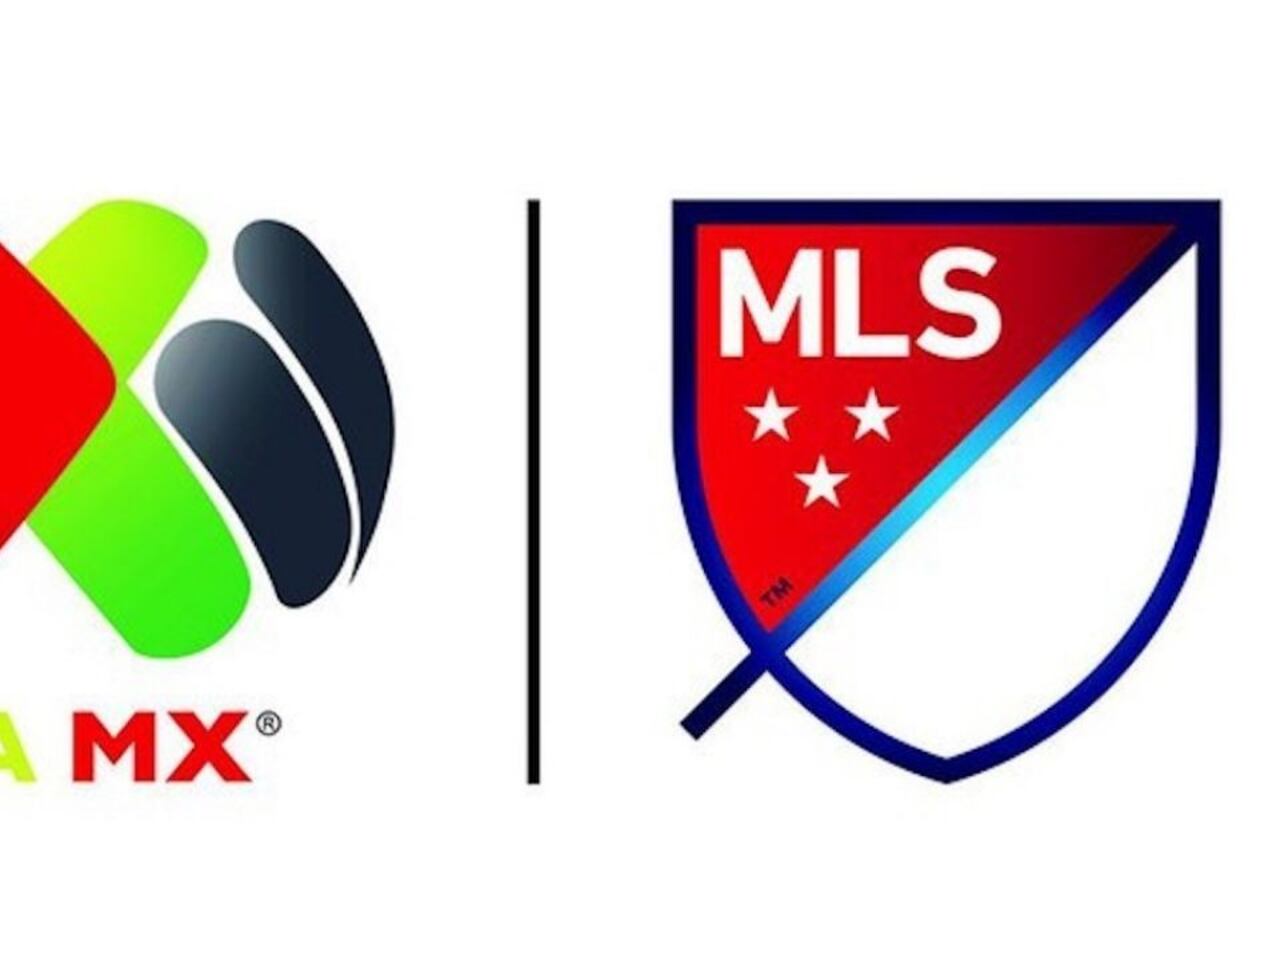 New ranking shows the MLS and puts Liga MX well above